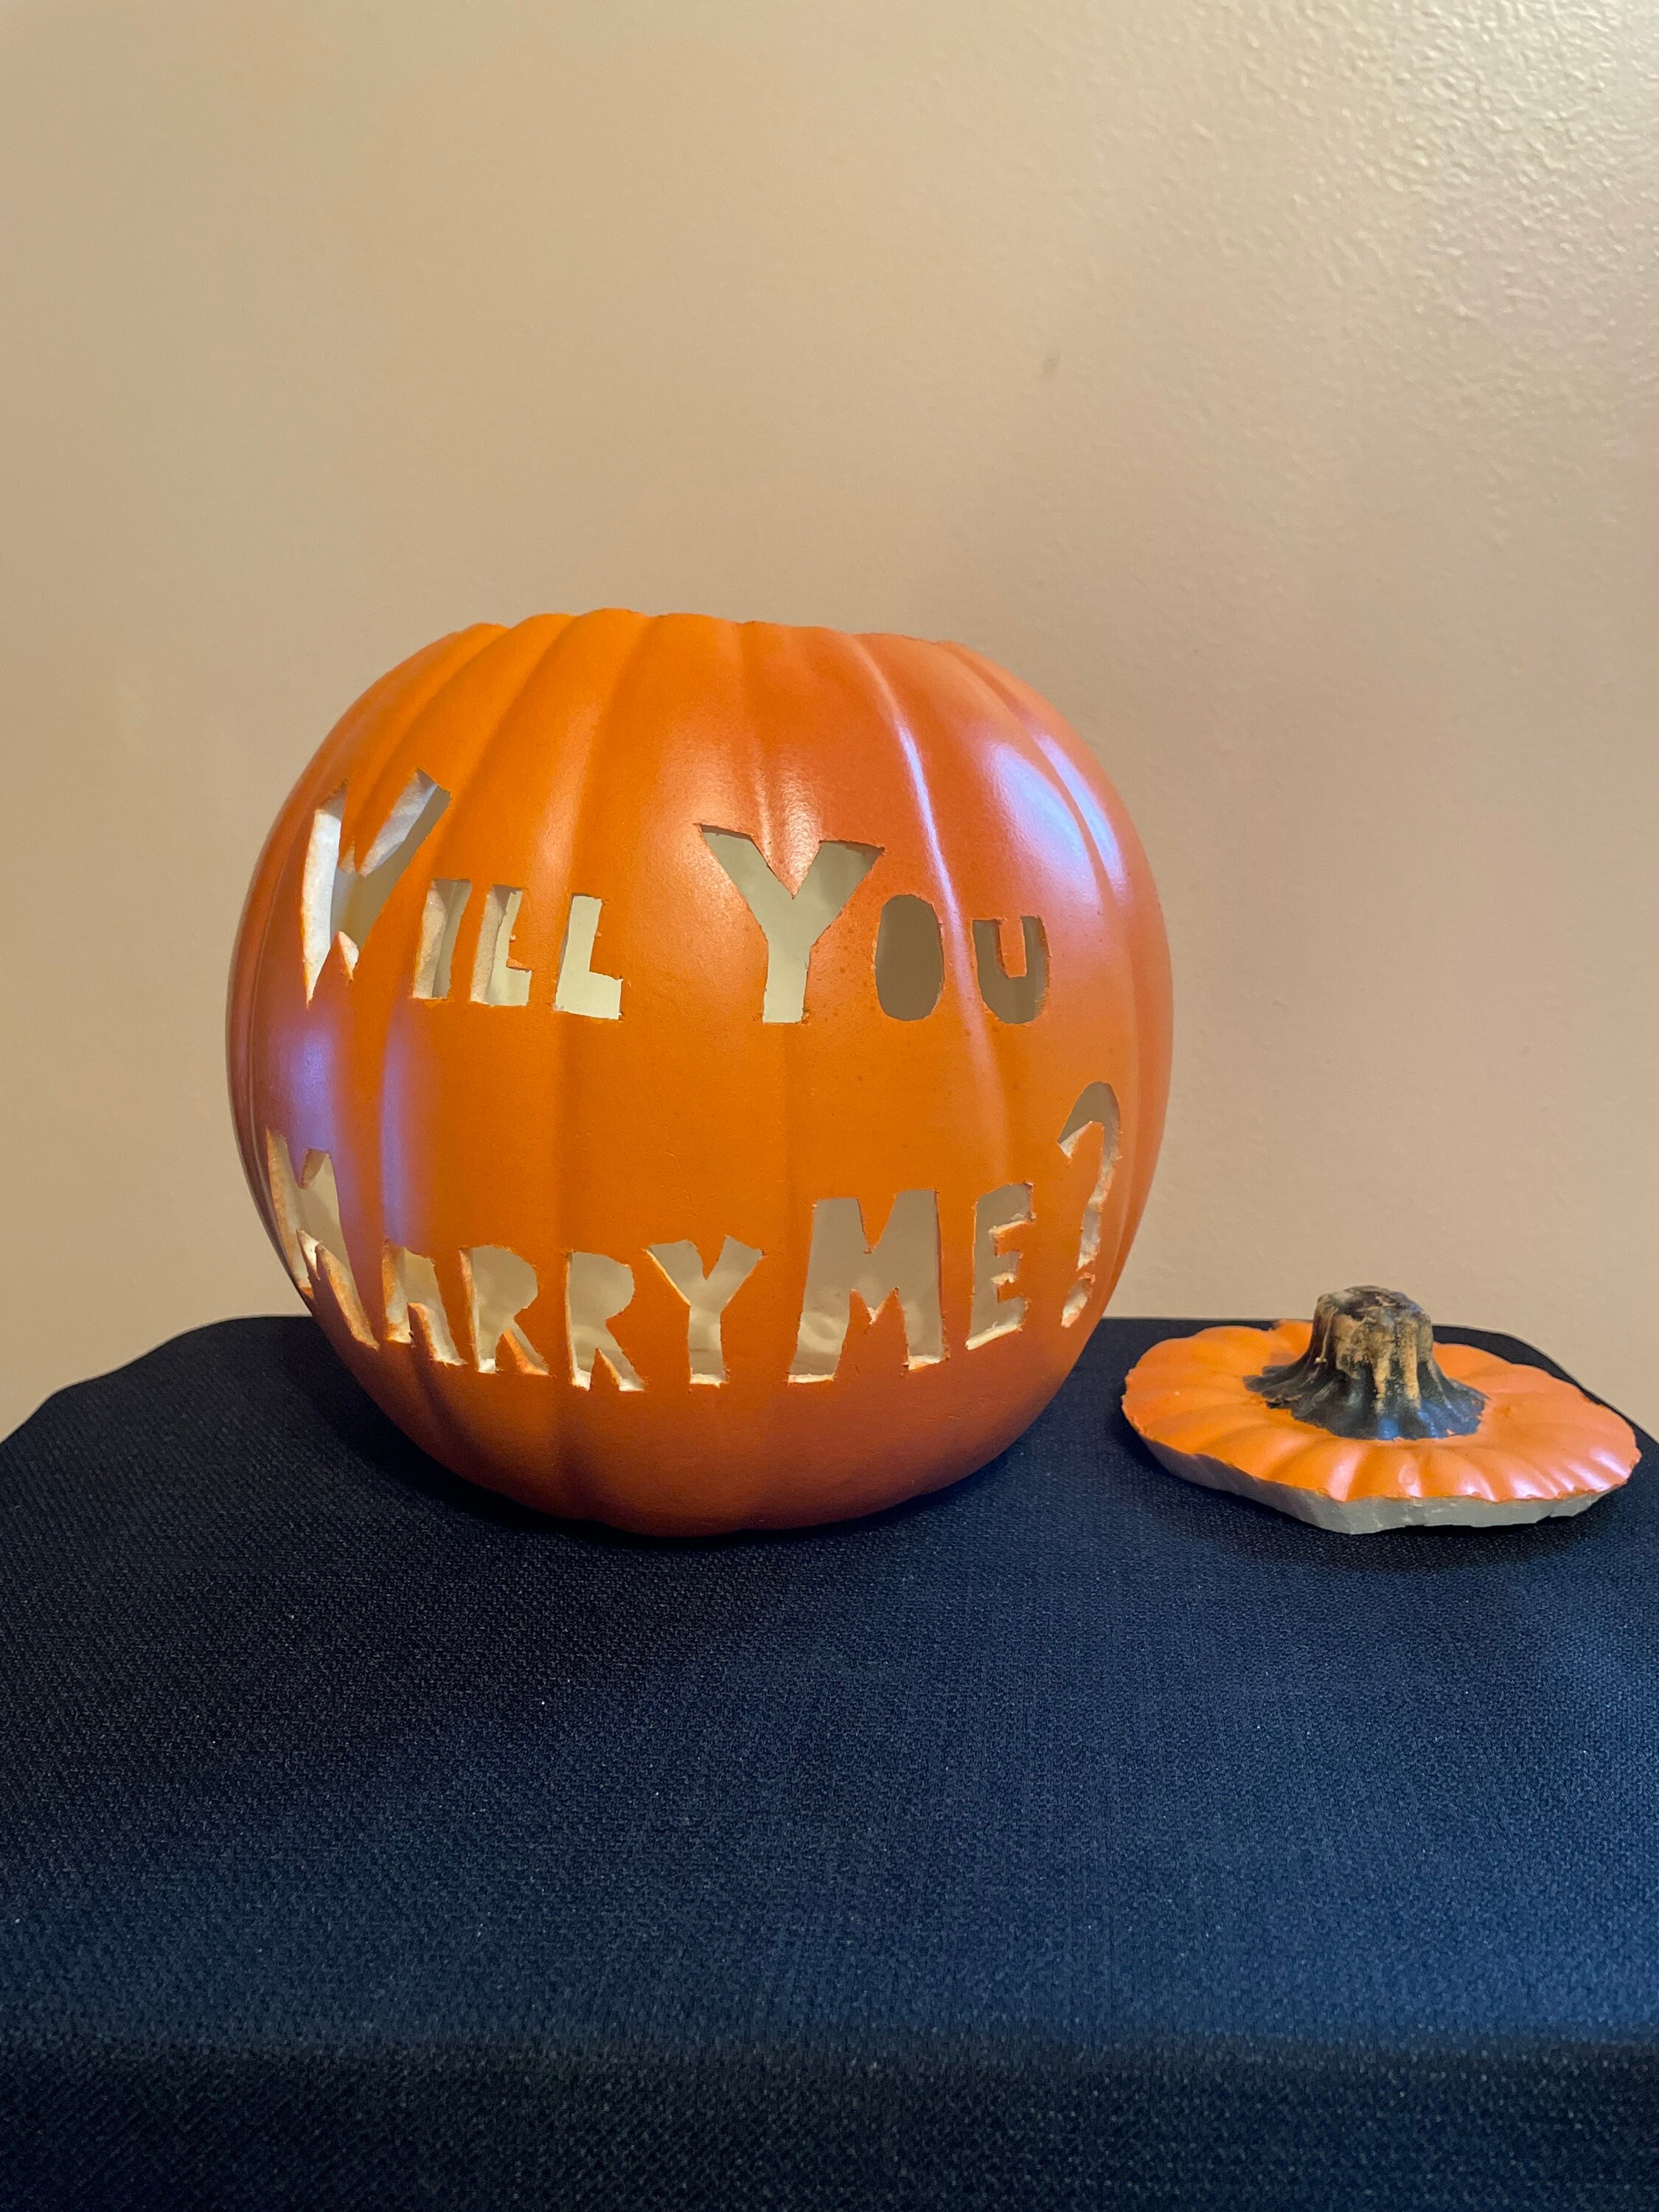 Should you buy the Culiau Customizer engraving pen to carve foam pumpkins?  check out my review video : r/PumpkinArt